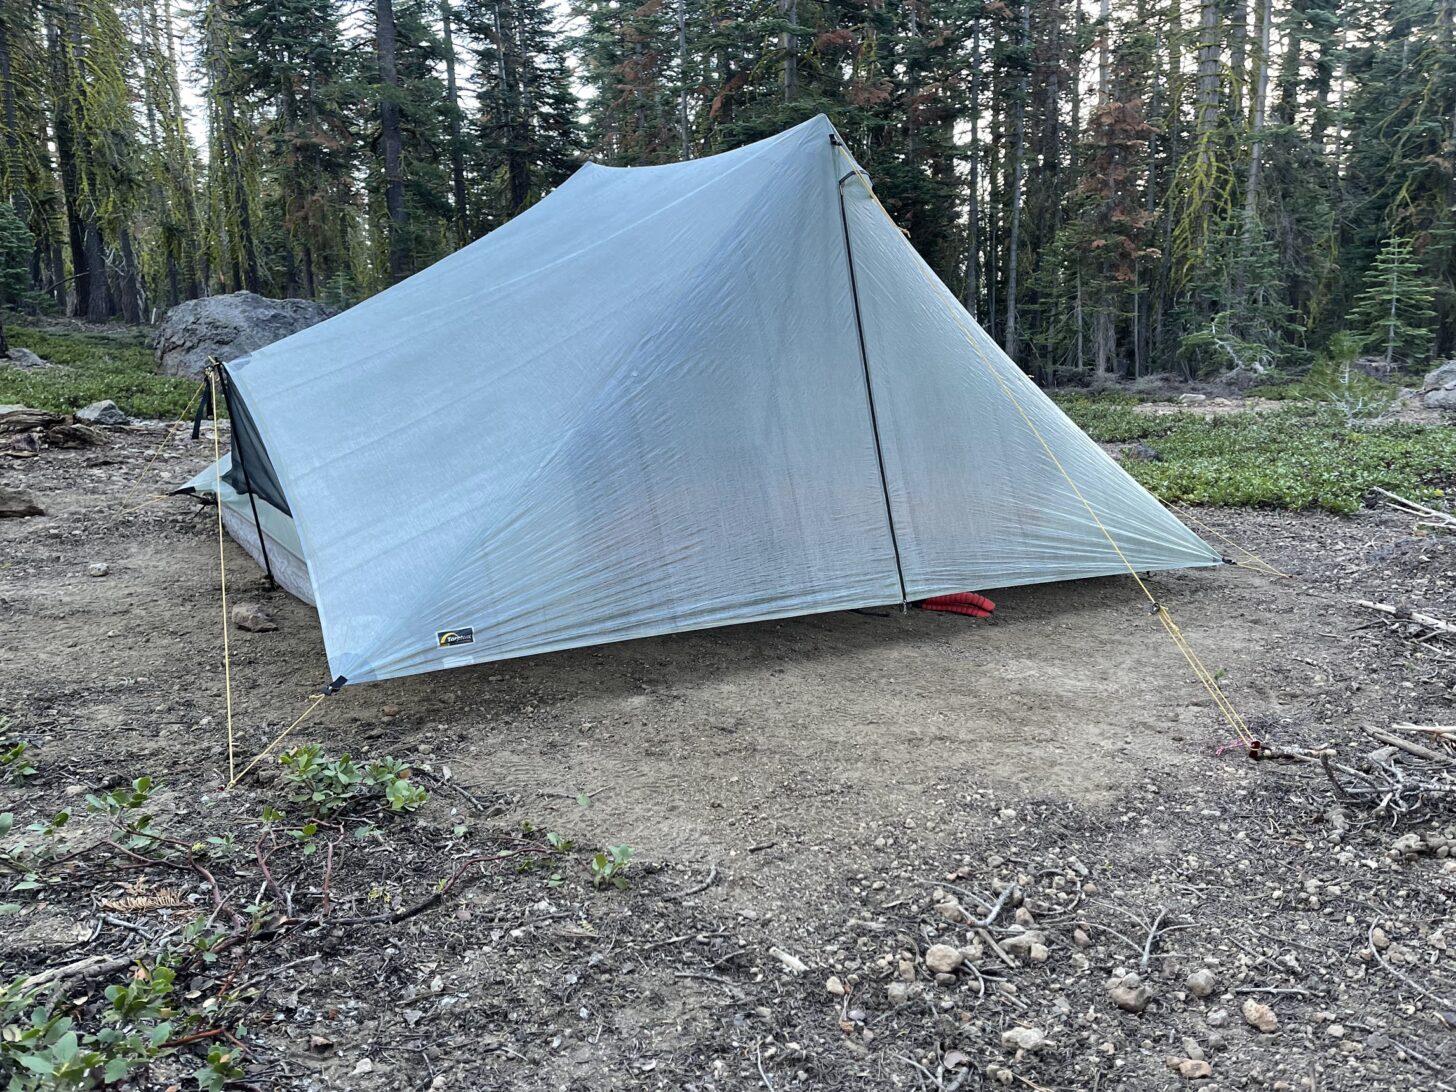 The Tarptent Dipole 2 Li in the Tahoe Basin, CA. Photo: Andrew Marshall.